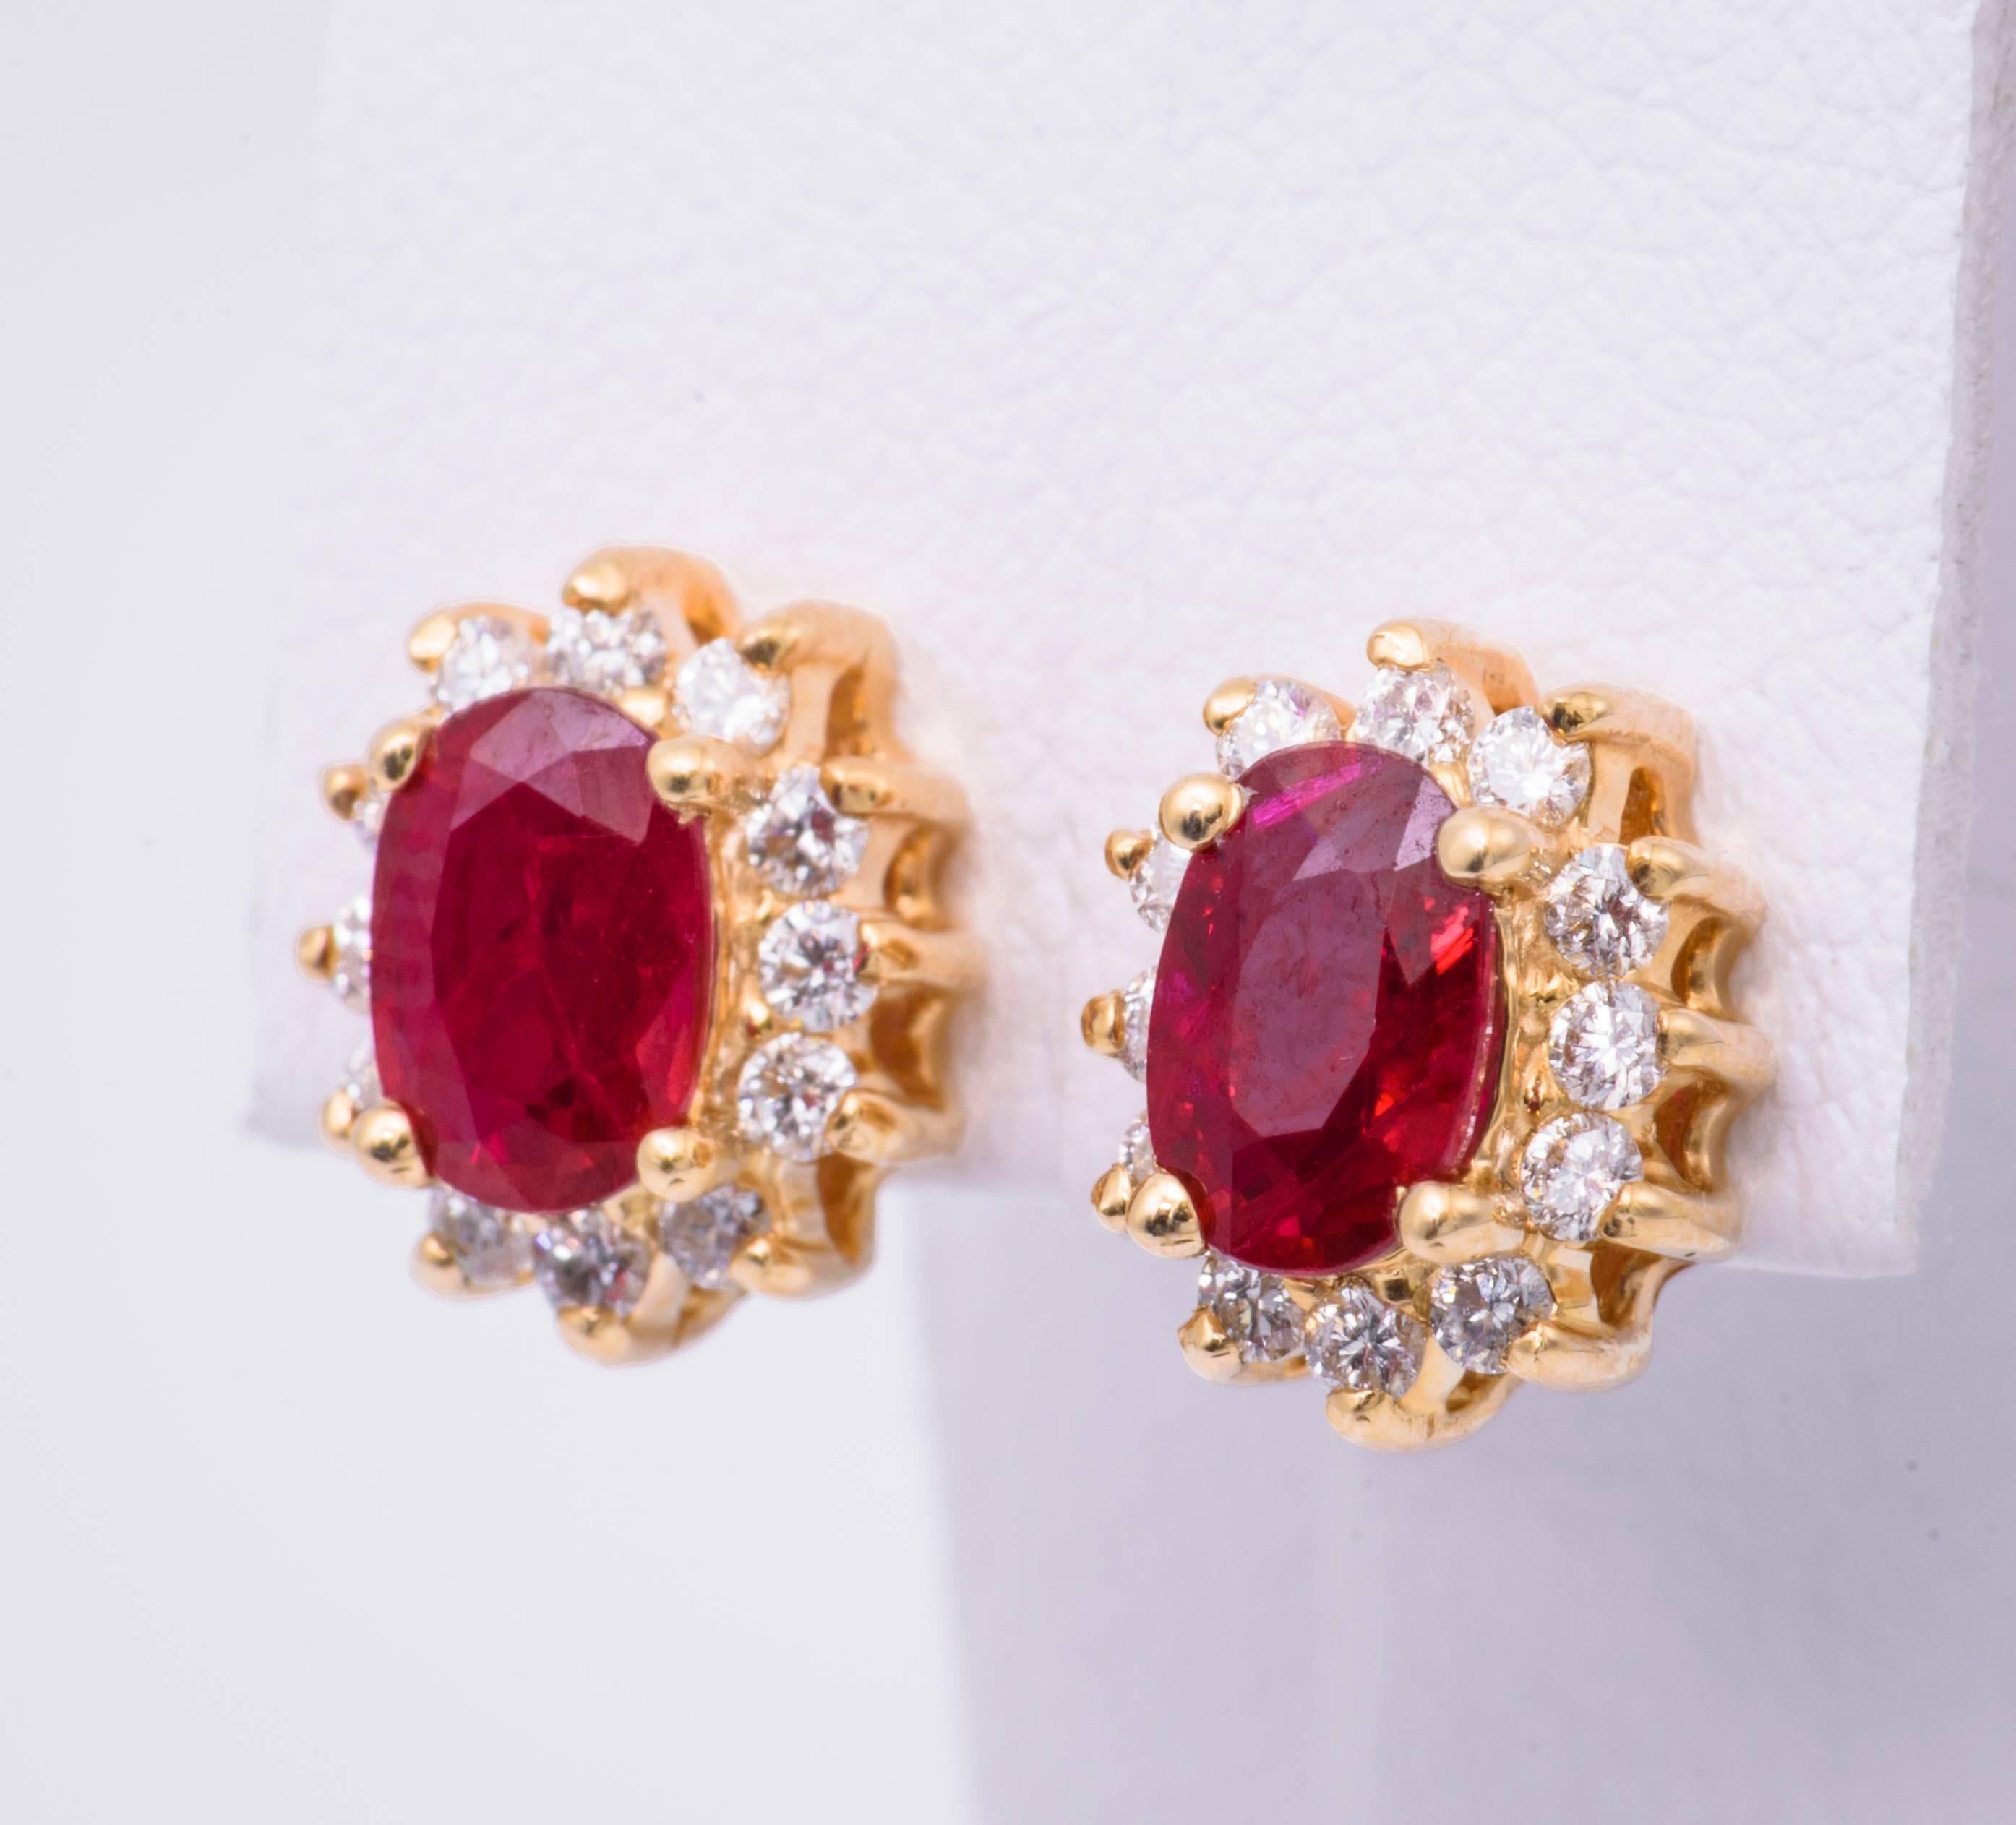 14K yellow gold
Ruby measuring 5 x 3 and 1.10 Cts.
Earring measuring 9 x 7
Diamonds: 0.32 Cts
All our gemstones are genuine and never illegally treated.
We Guarantee it
